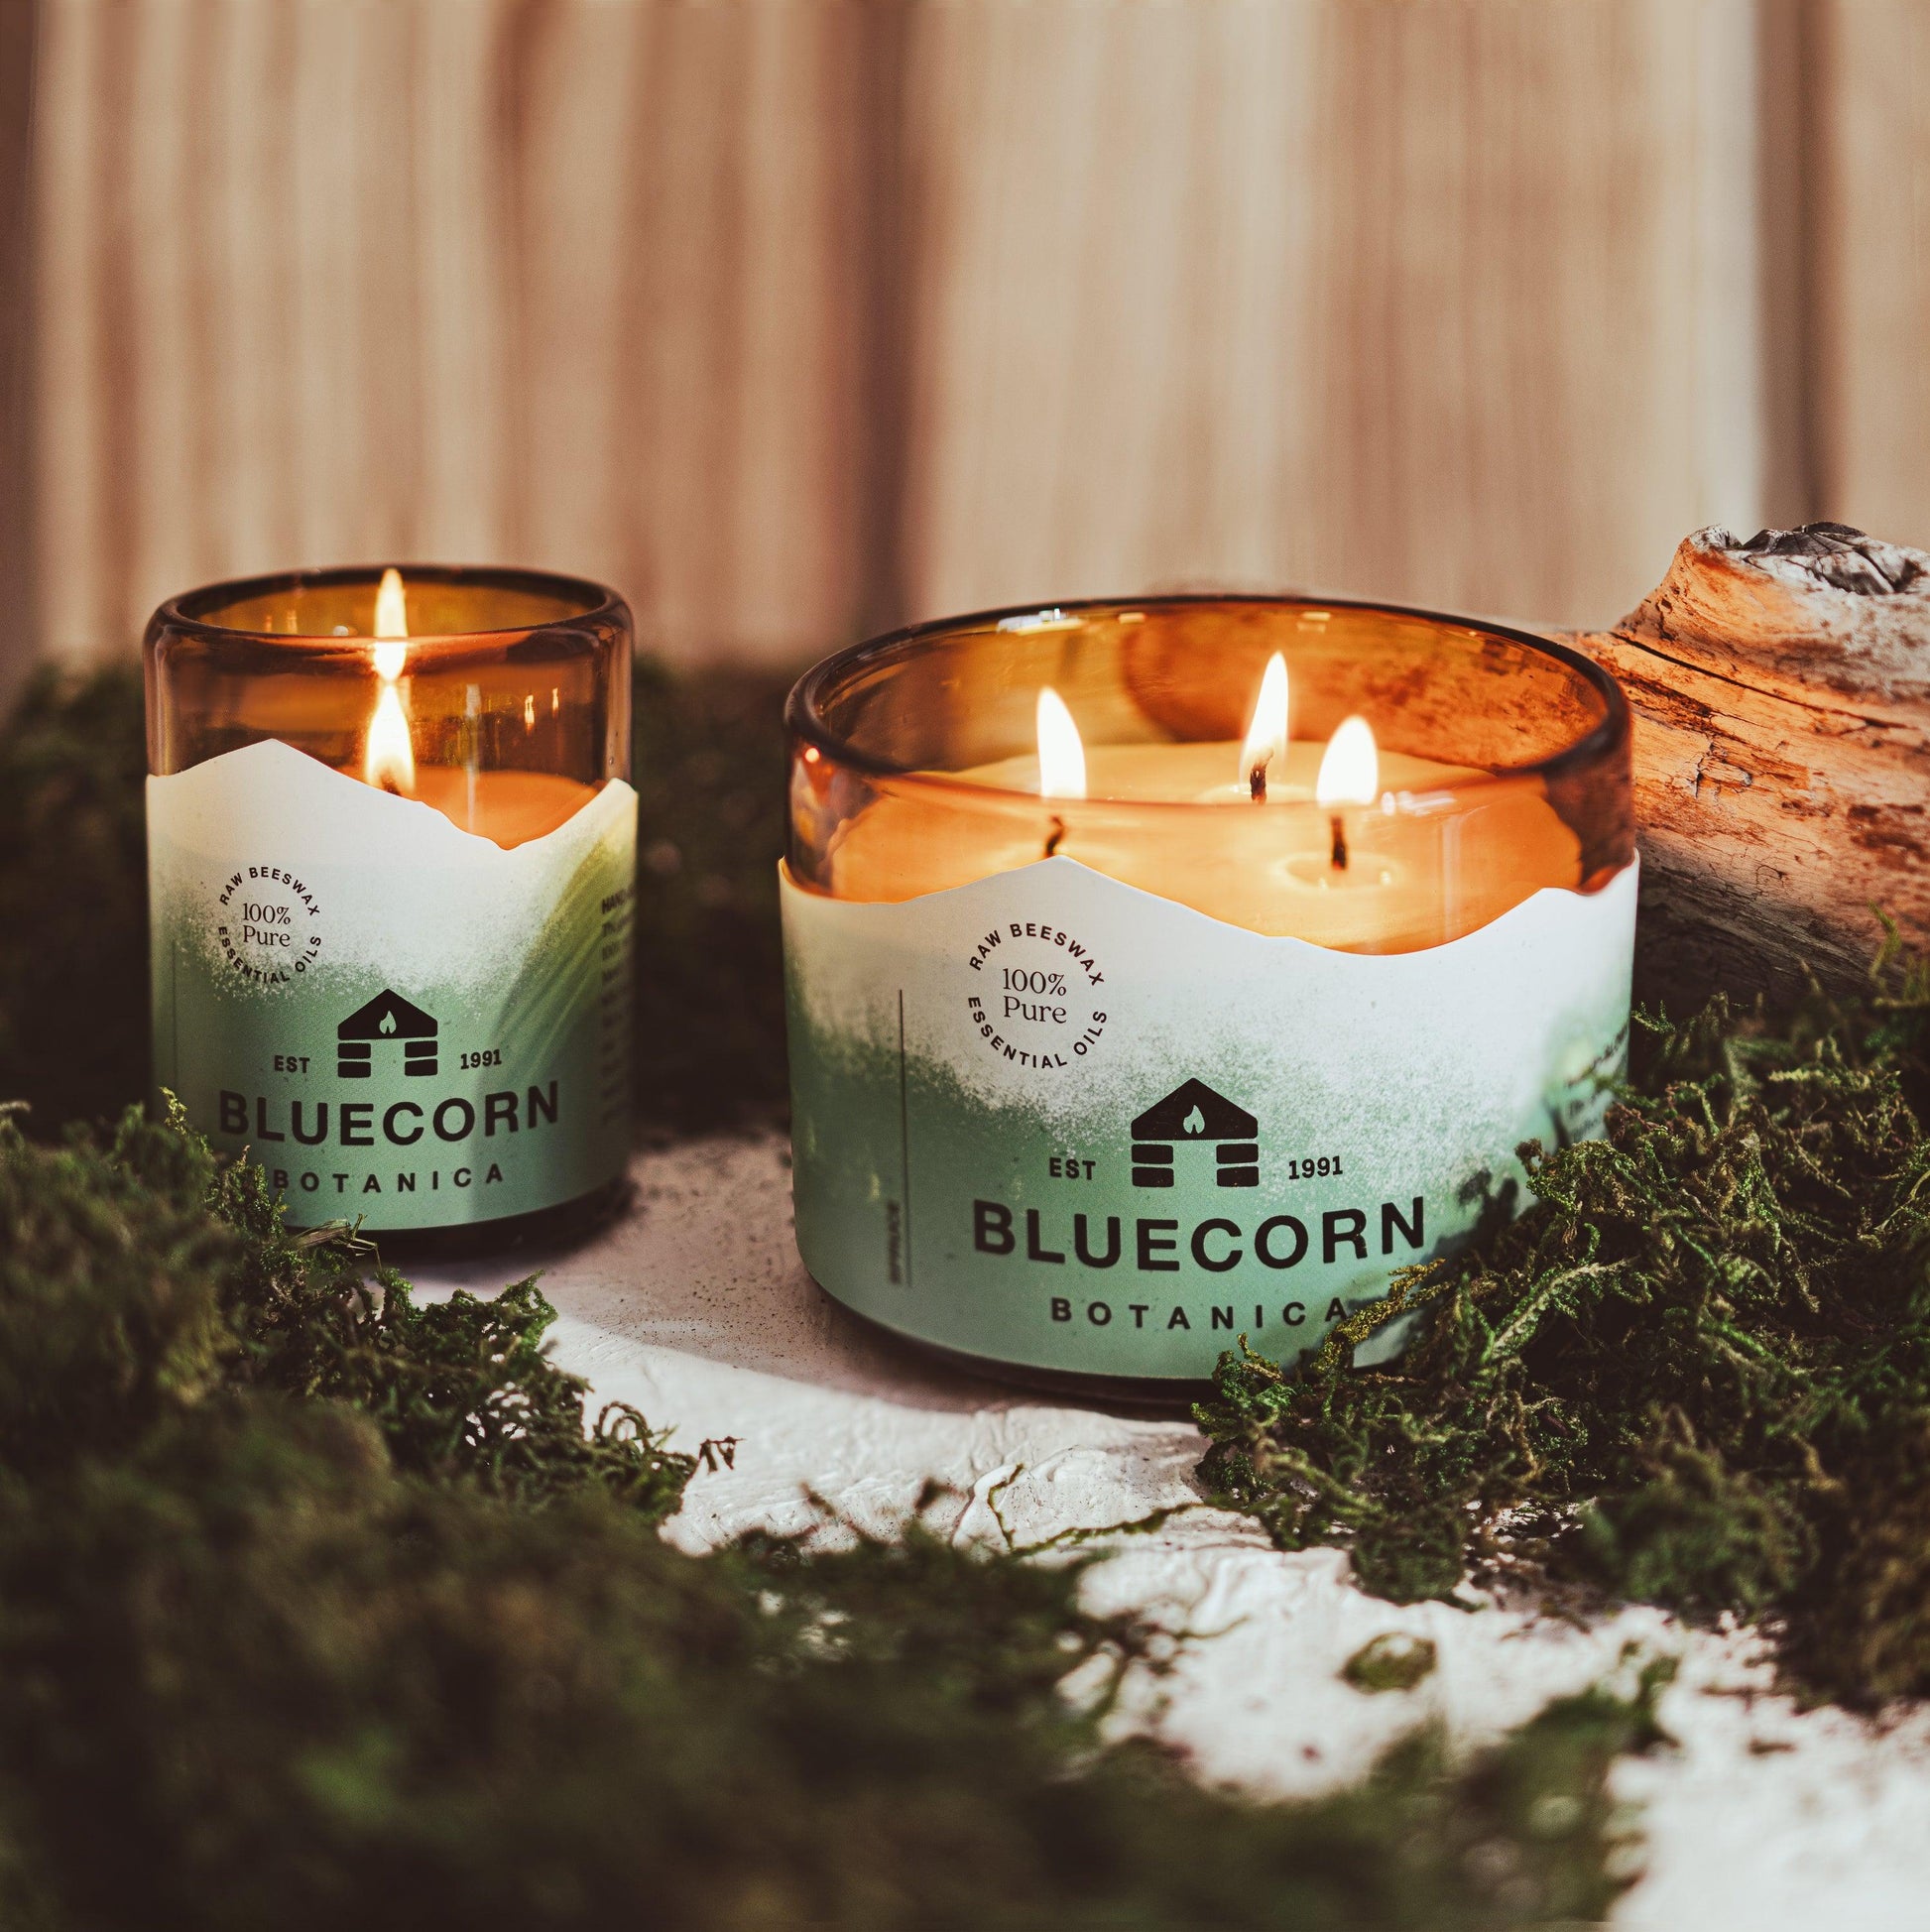 bluecorn botanica beeswax candles scented with spruce essential oil in a blown glass holder